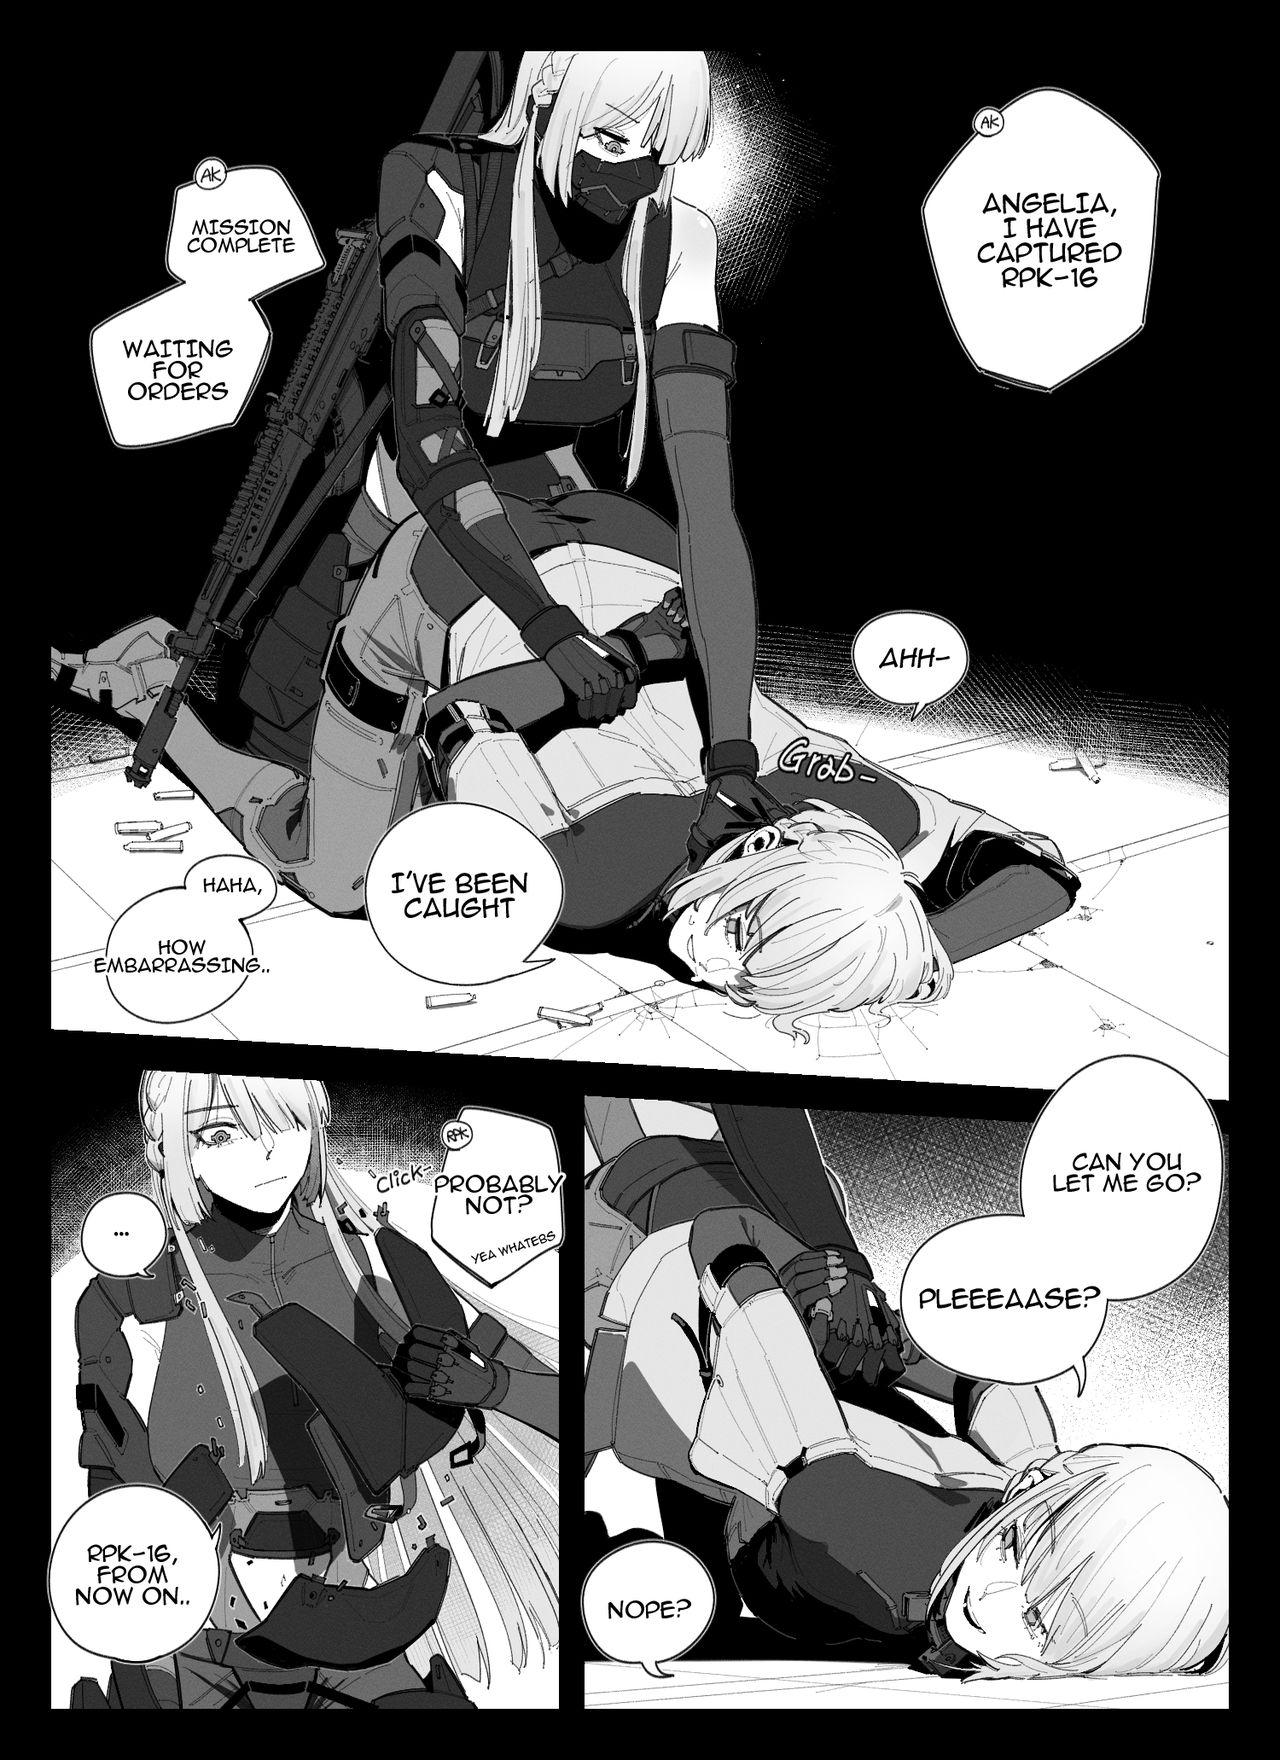 Camsex RPK Wants To Be A Human - Girls frontline Korean - Page 1